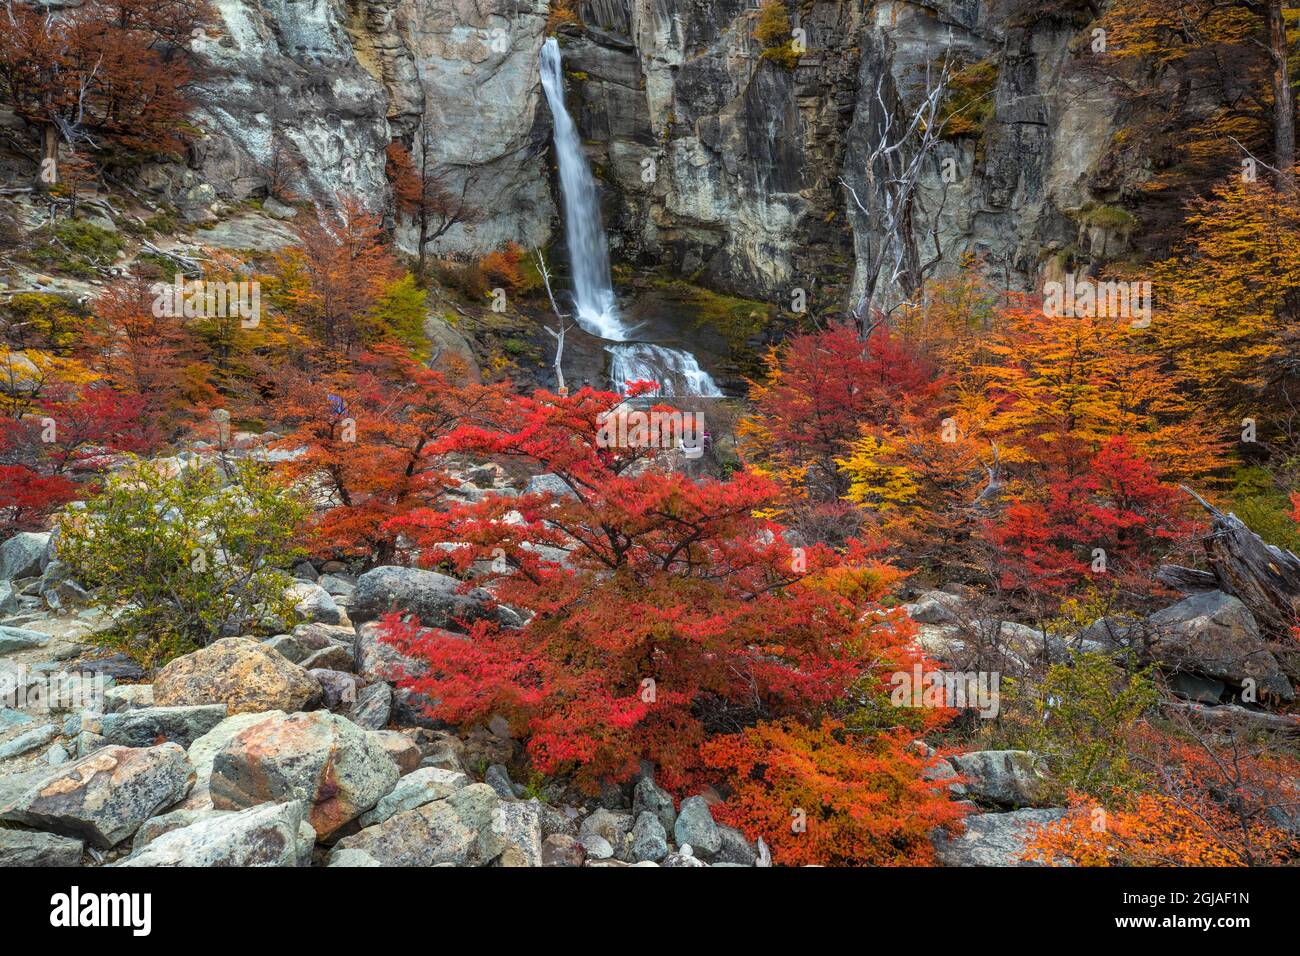 Argentina, Patagonia, El Chalten. Waterfall and autumn colors on southern beech trees. Stock Photo